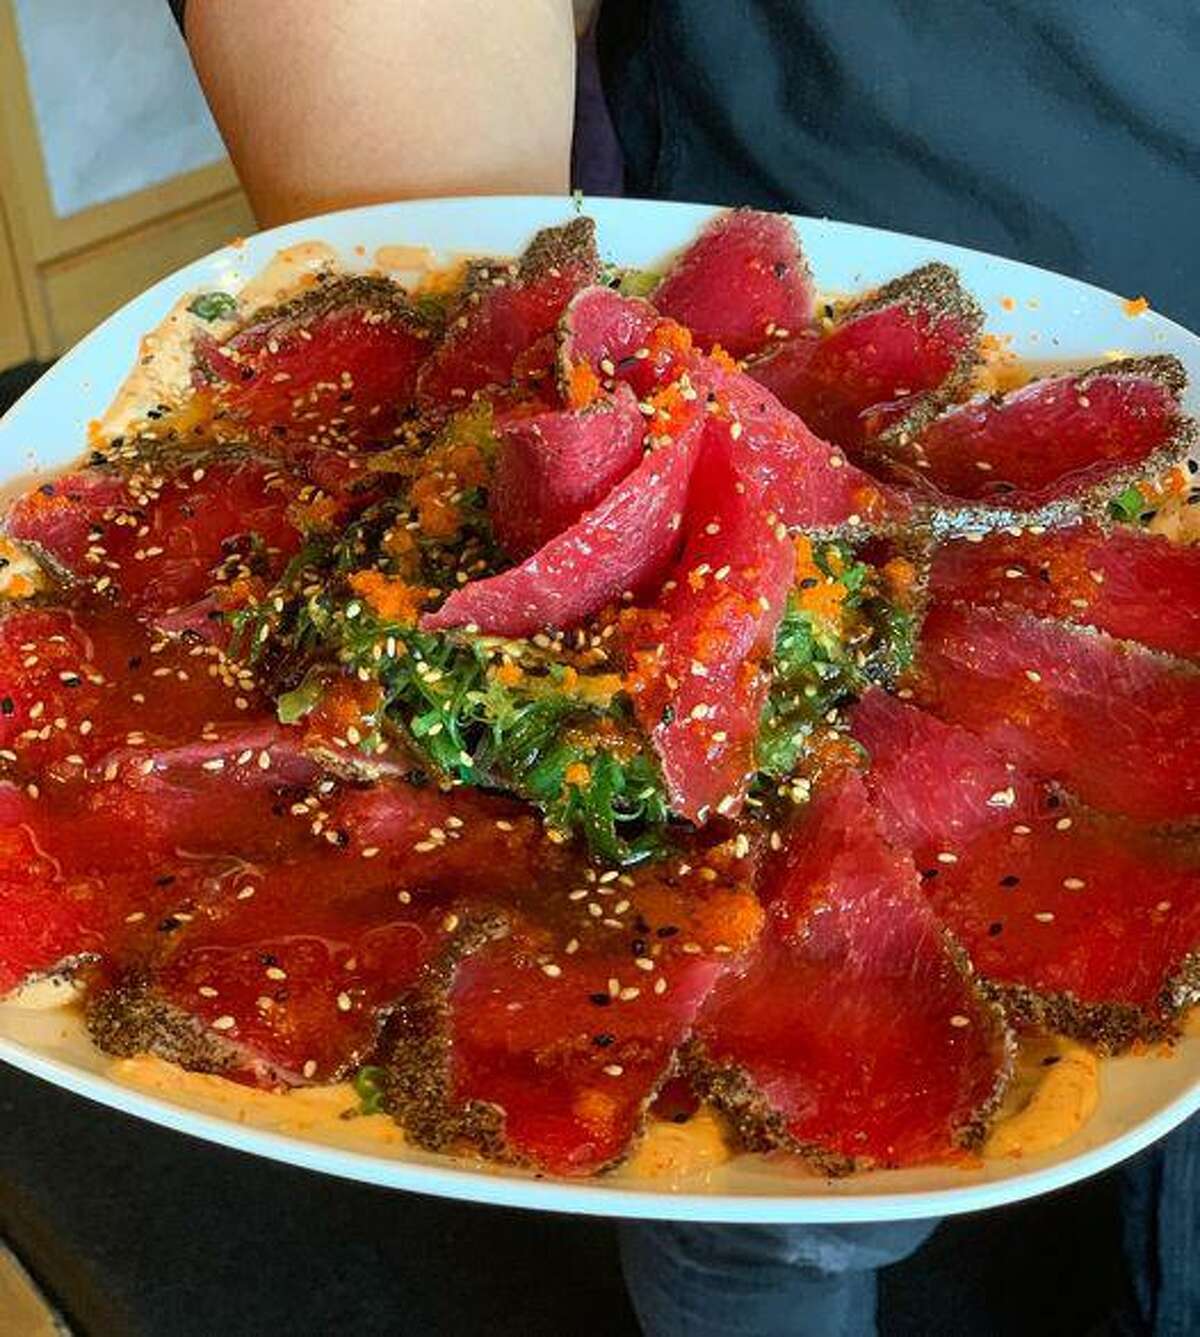 Katy Taste Crawl gives Katy-area food lovers opportunities to try appetizers at 15 local restaurants while supporting charities. The event runs through Wednesday, March 31. Aderezo de Atun from KoKai is pictured here.